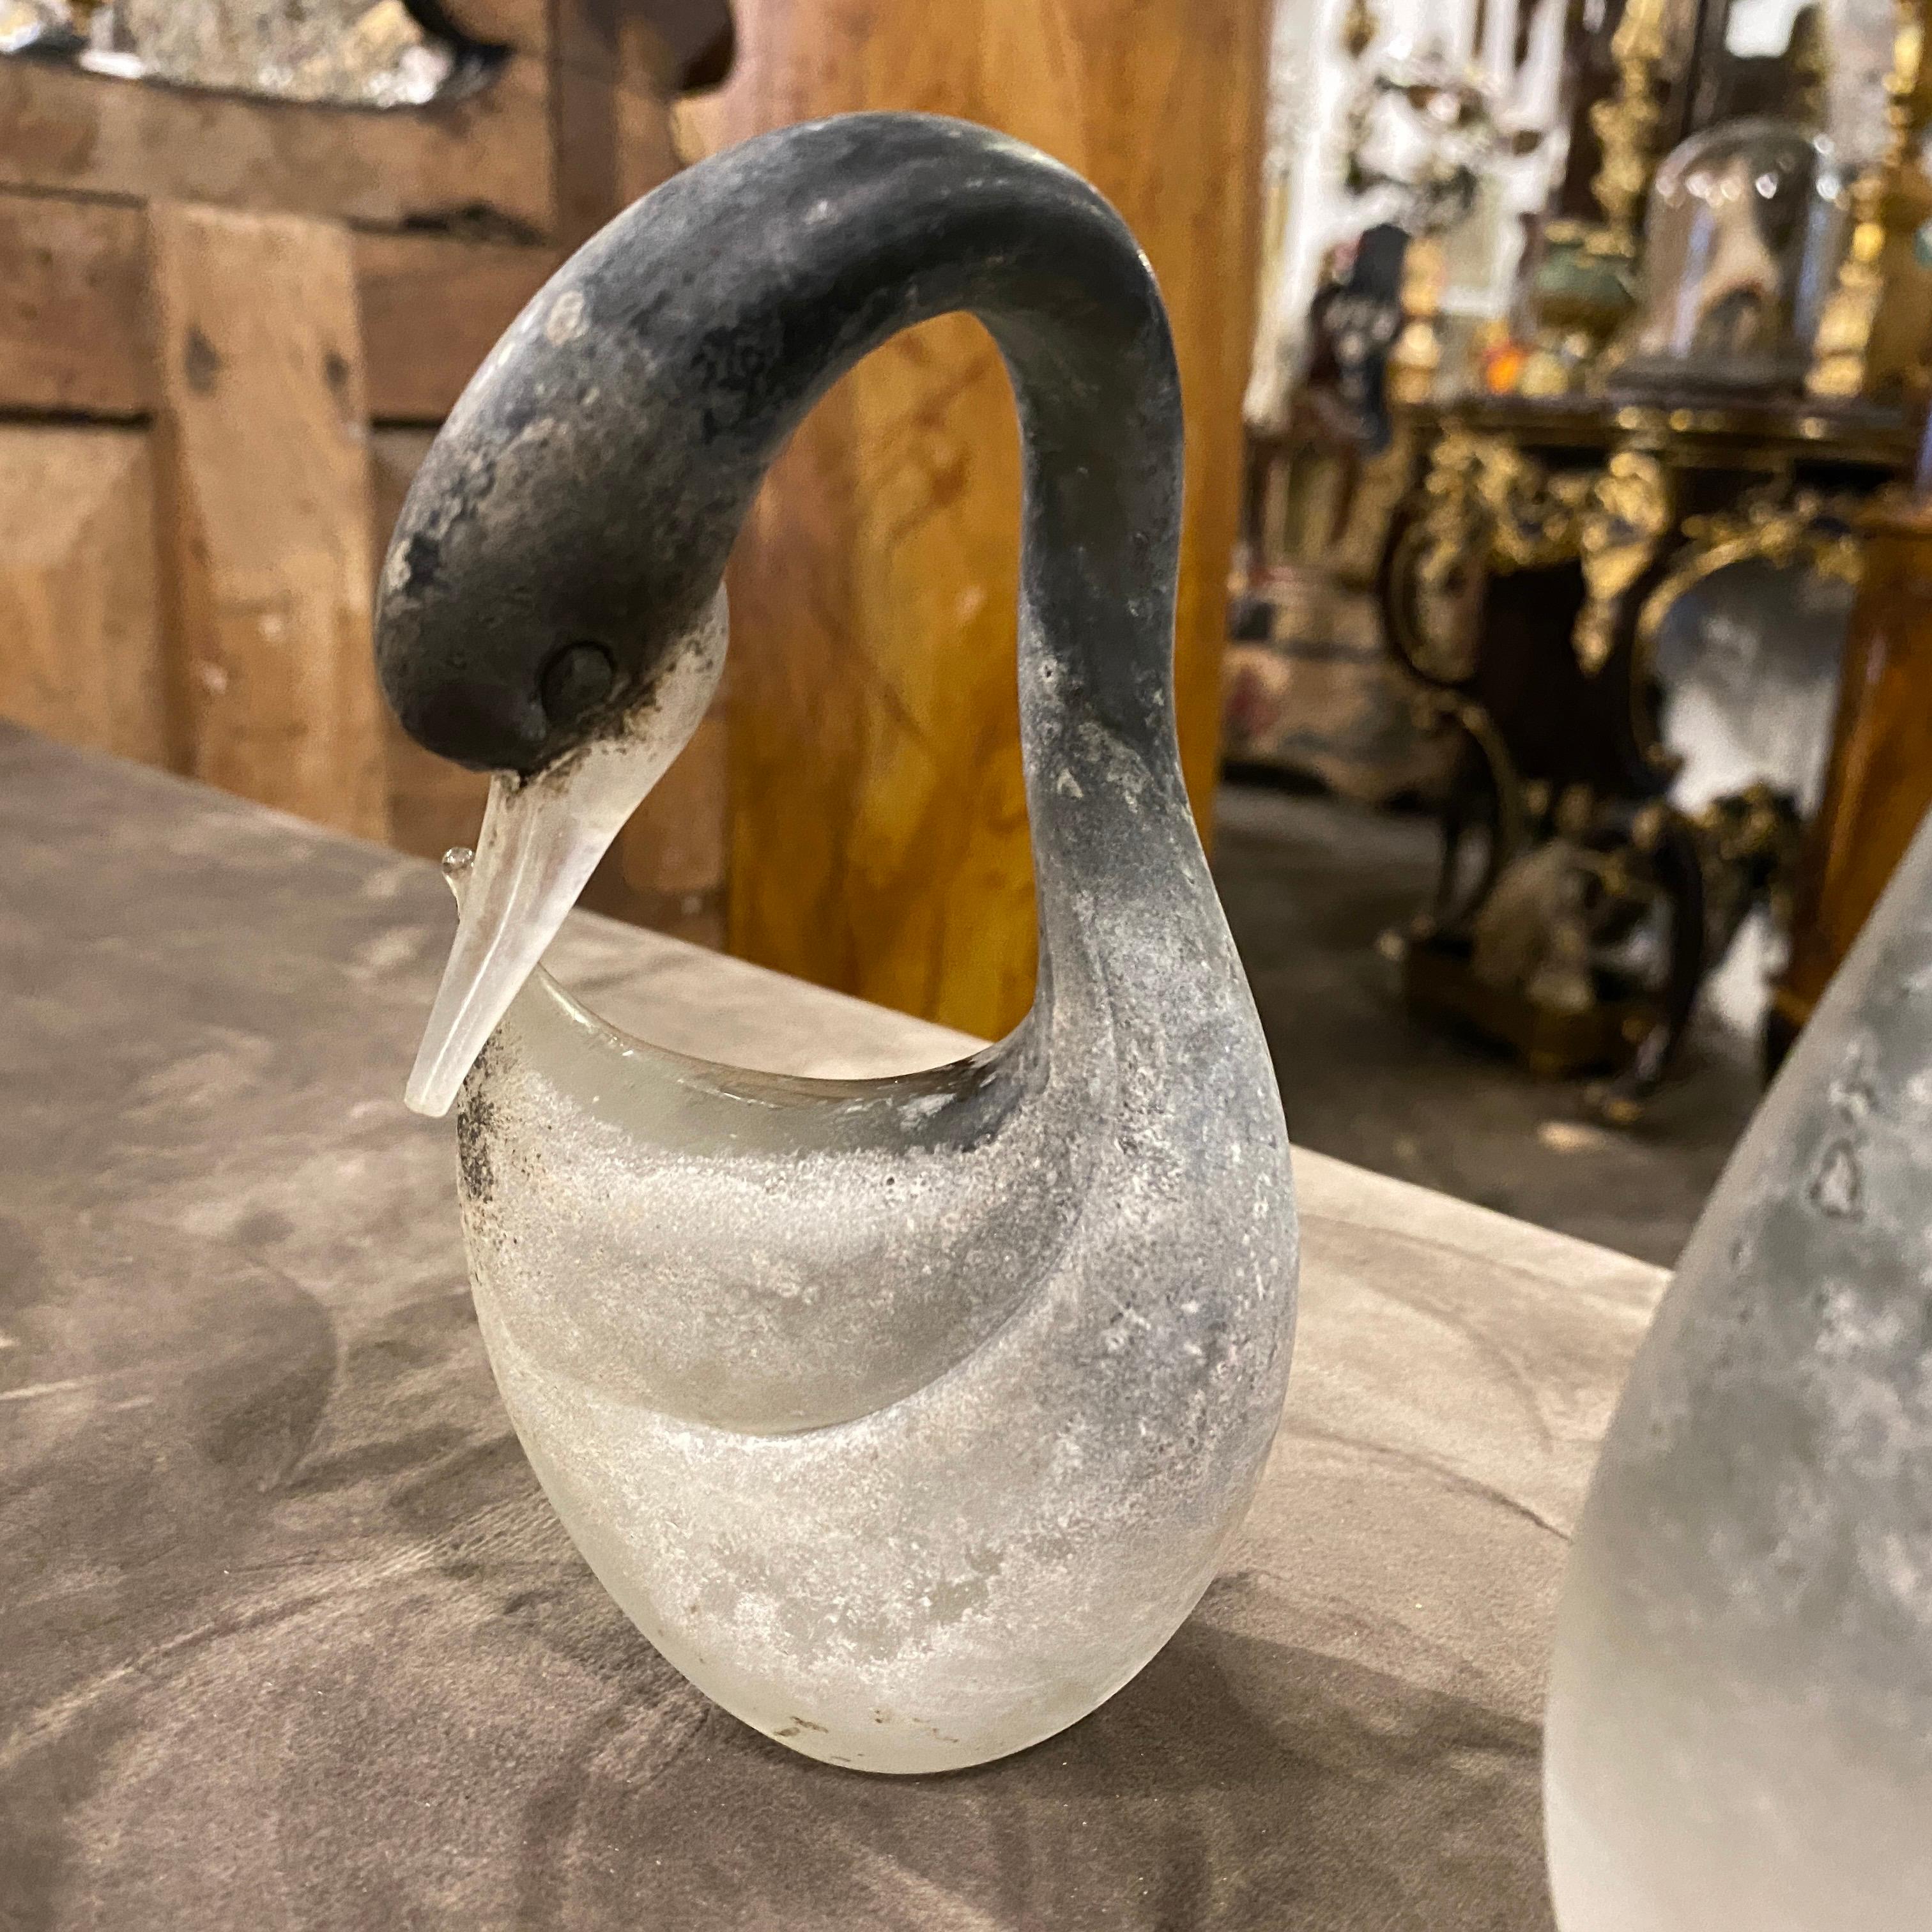 Two sculptures of swans in scavo murano glass by Cenedese, they are in perfect conditions, they are acid signed on the bottom cenedese, the small one has an height of 14 cm.